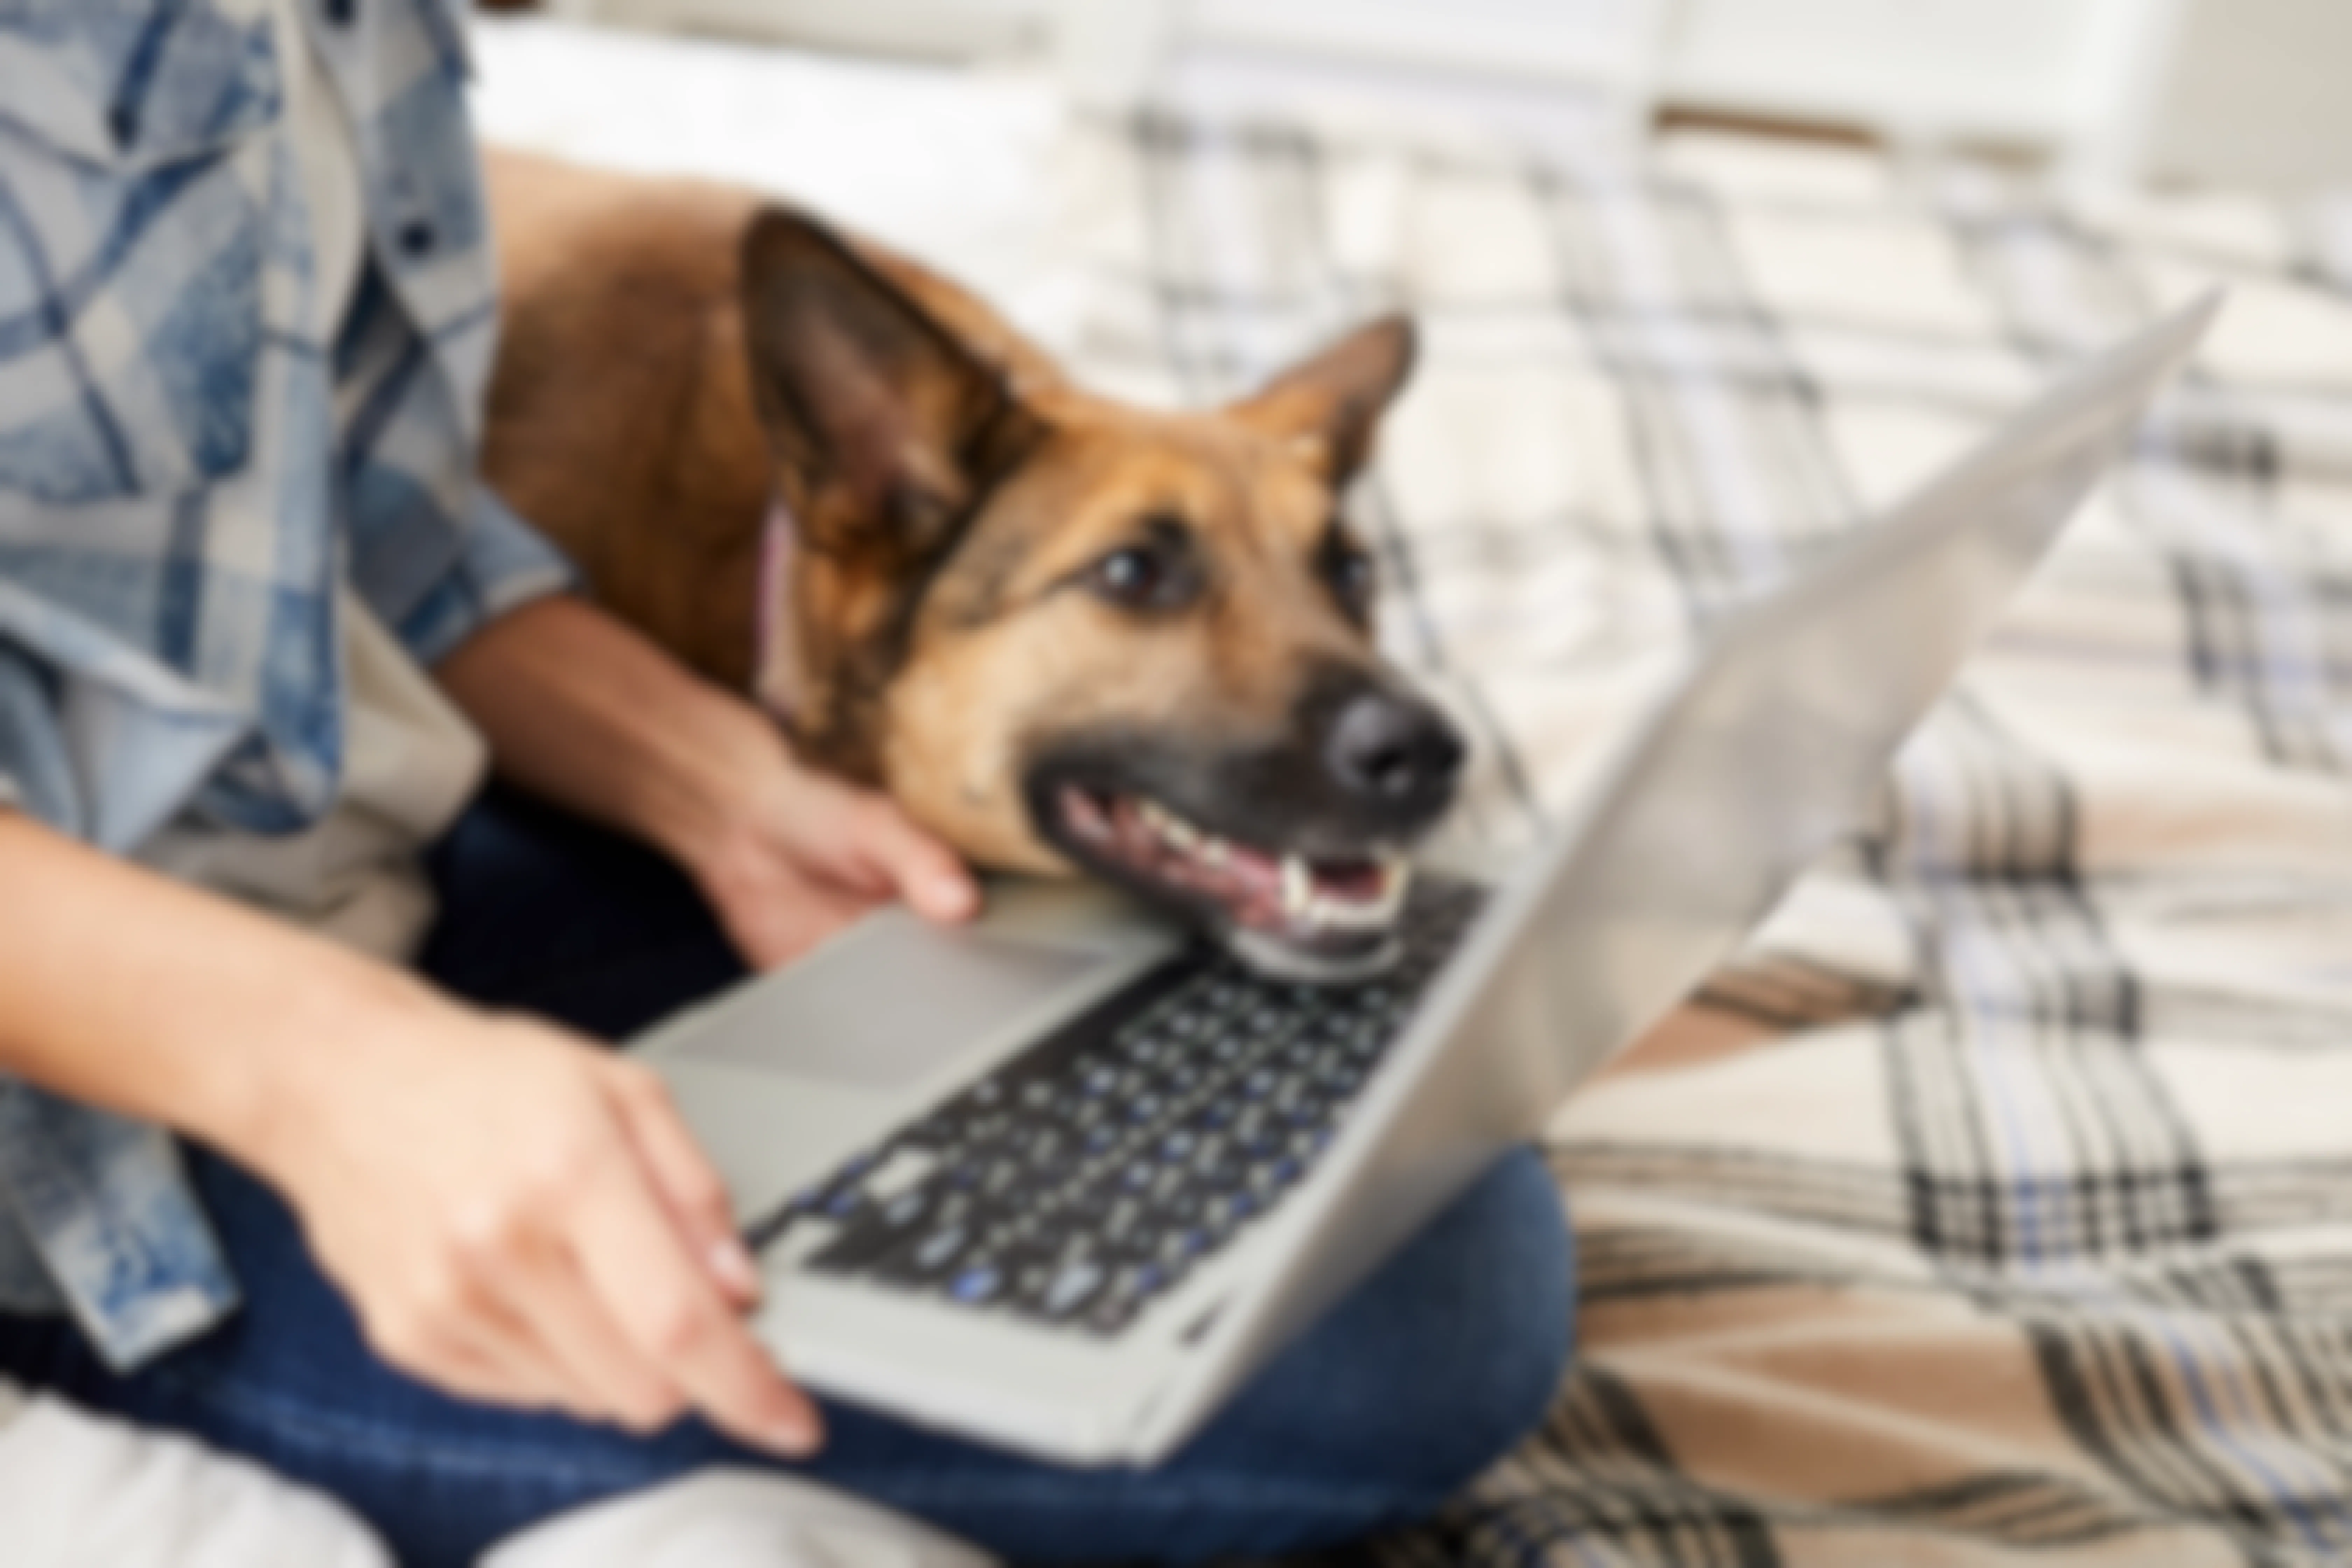 A person holding a laptop computer on their lap. A large dog is laying next to them, resting its head on the keyboard.